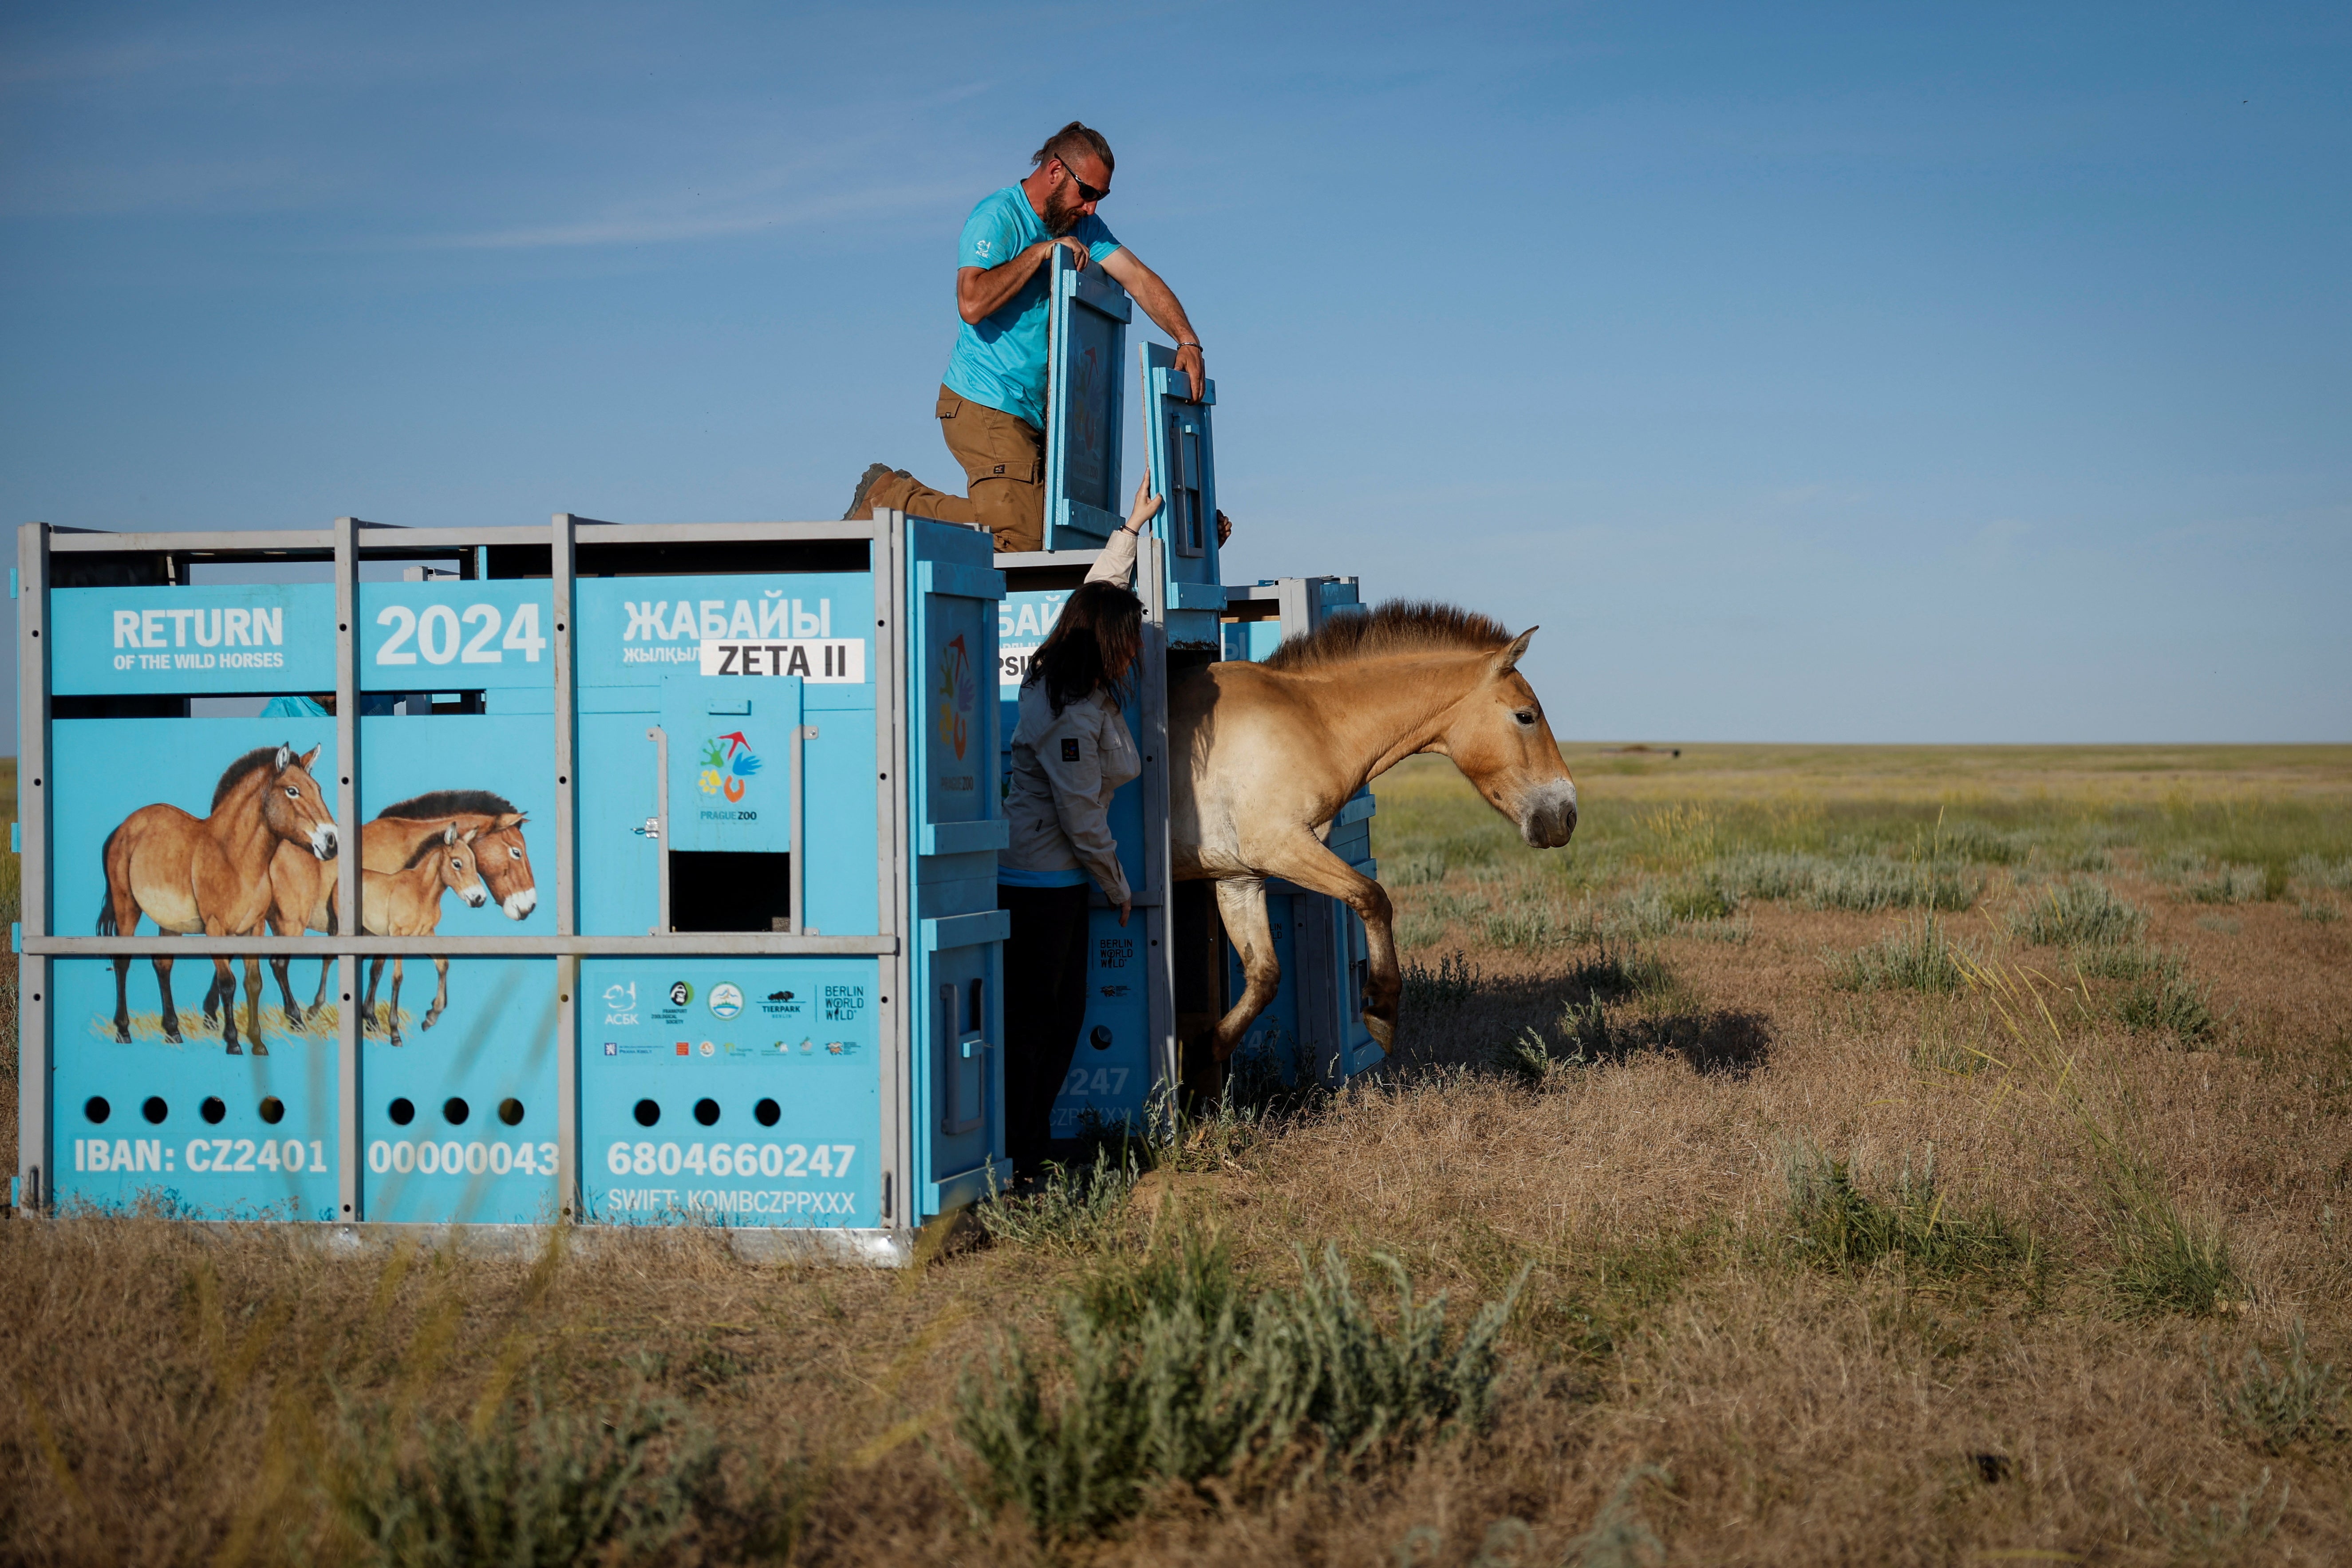 A Przewalski’s horse leaves its container after being released into an acclimatisation enclosure at the Alibi field station and reintroduction centre, in the Altyn Dala area, Kazakhstan, June 4, 2024